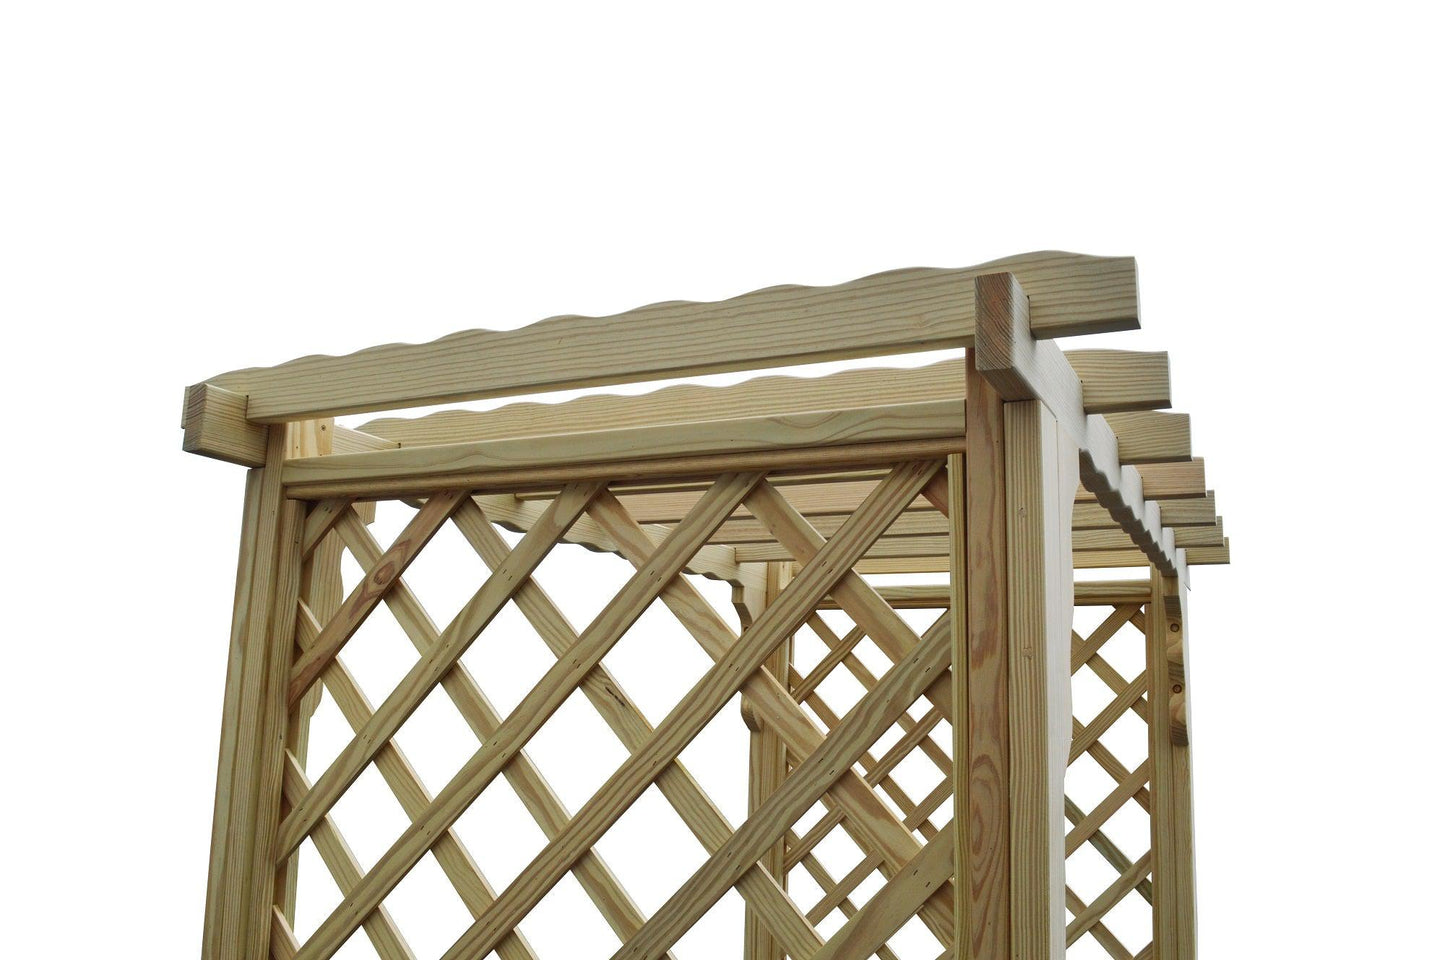 A&L FURNITURE CO. 5' Covington Pressure Treated Pine Arbor - LEAD TIME TO SHIP 10 BUSINESS DAYS